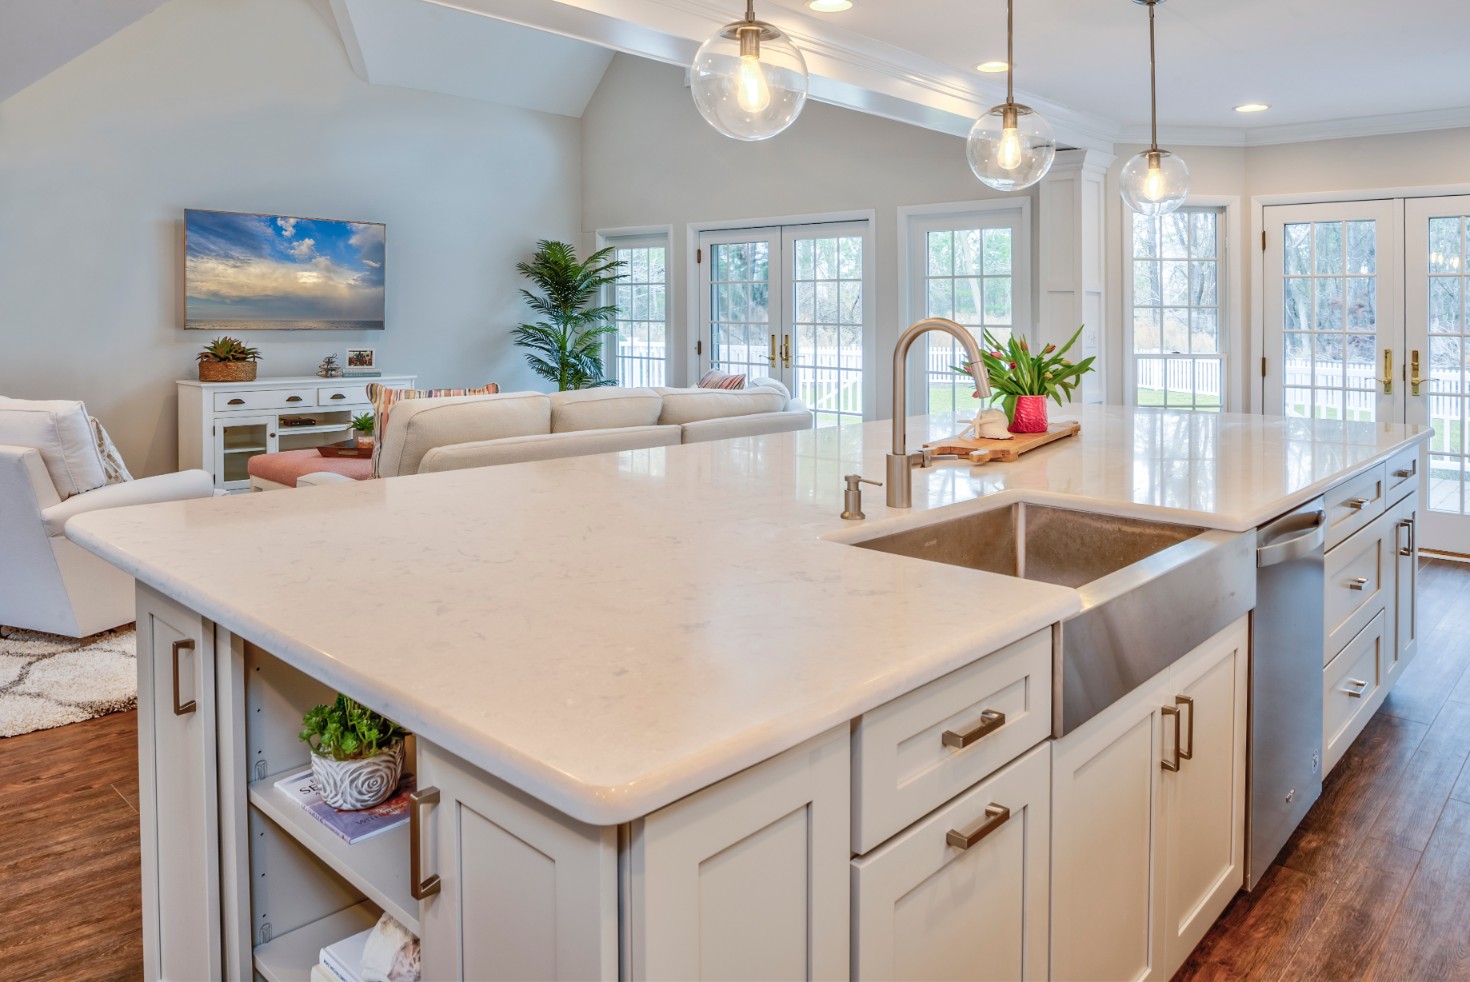 Canal Way Kitchen Remodel in Bethany Beach DE with Center Island with Brushed Stainless Steel Farm Sink and Dishwasher